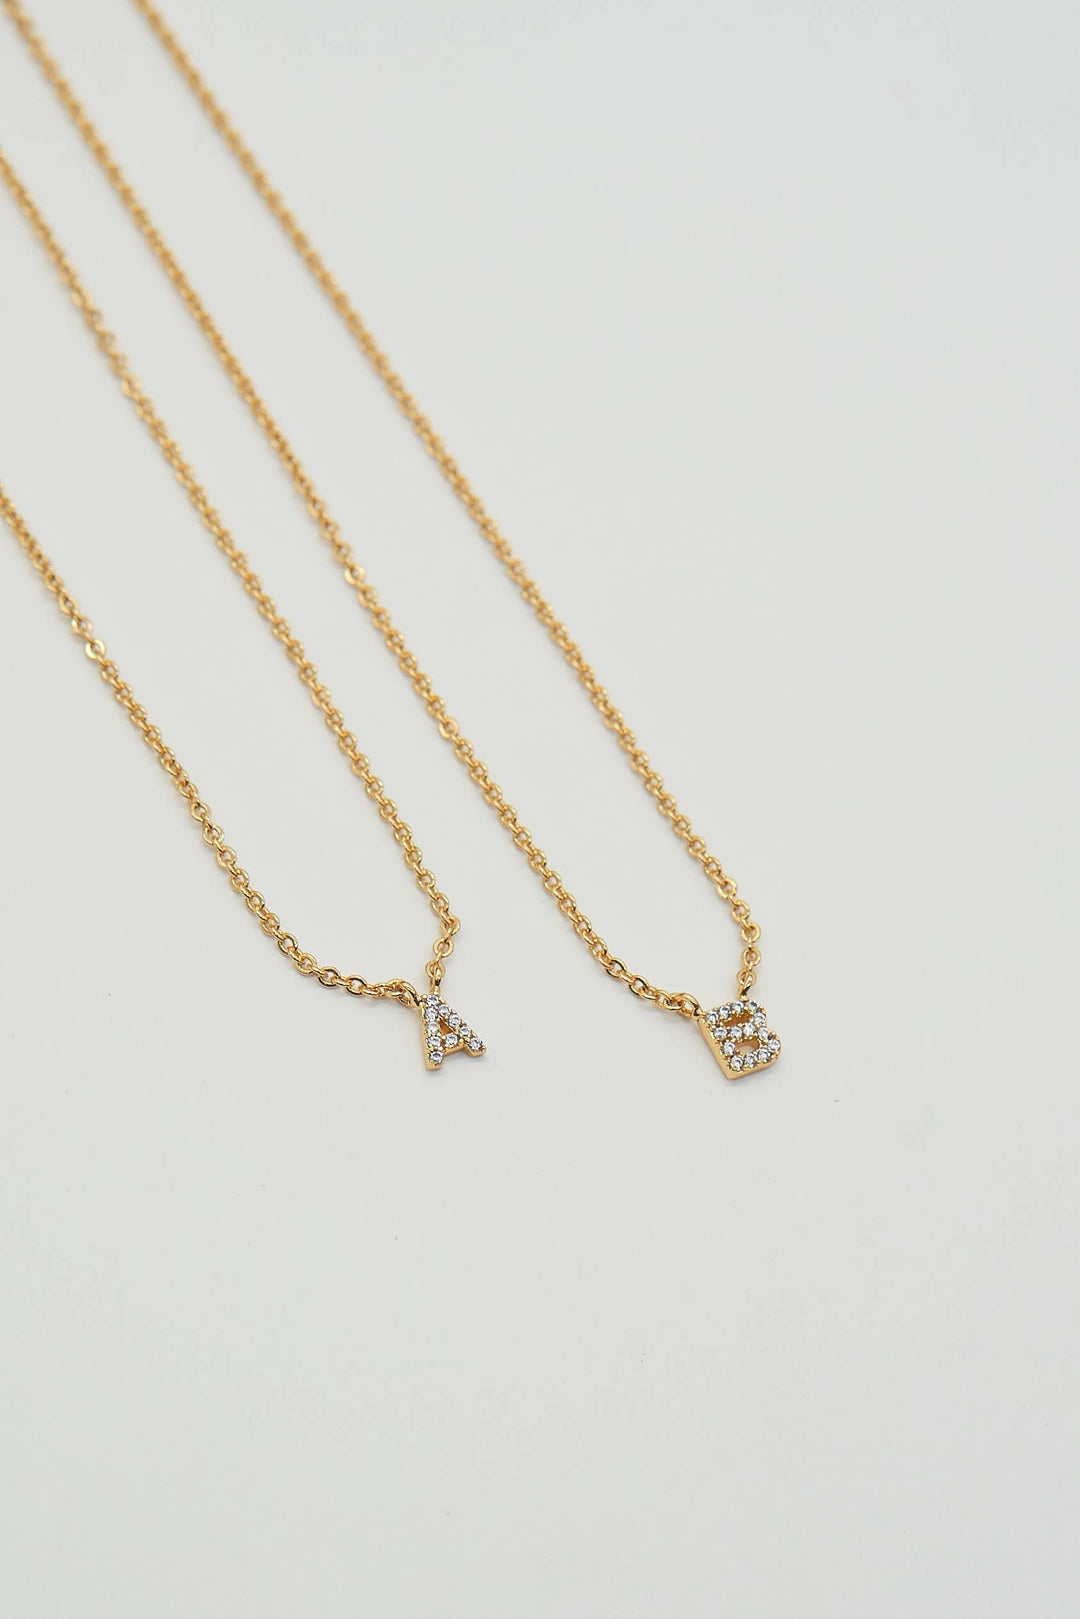 Shiny Initial Necklace: Holiday Favorite!: L